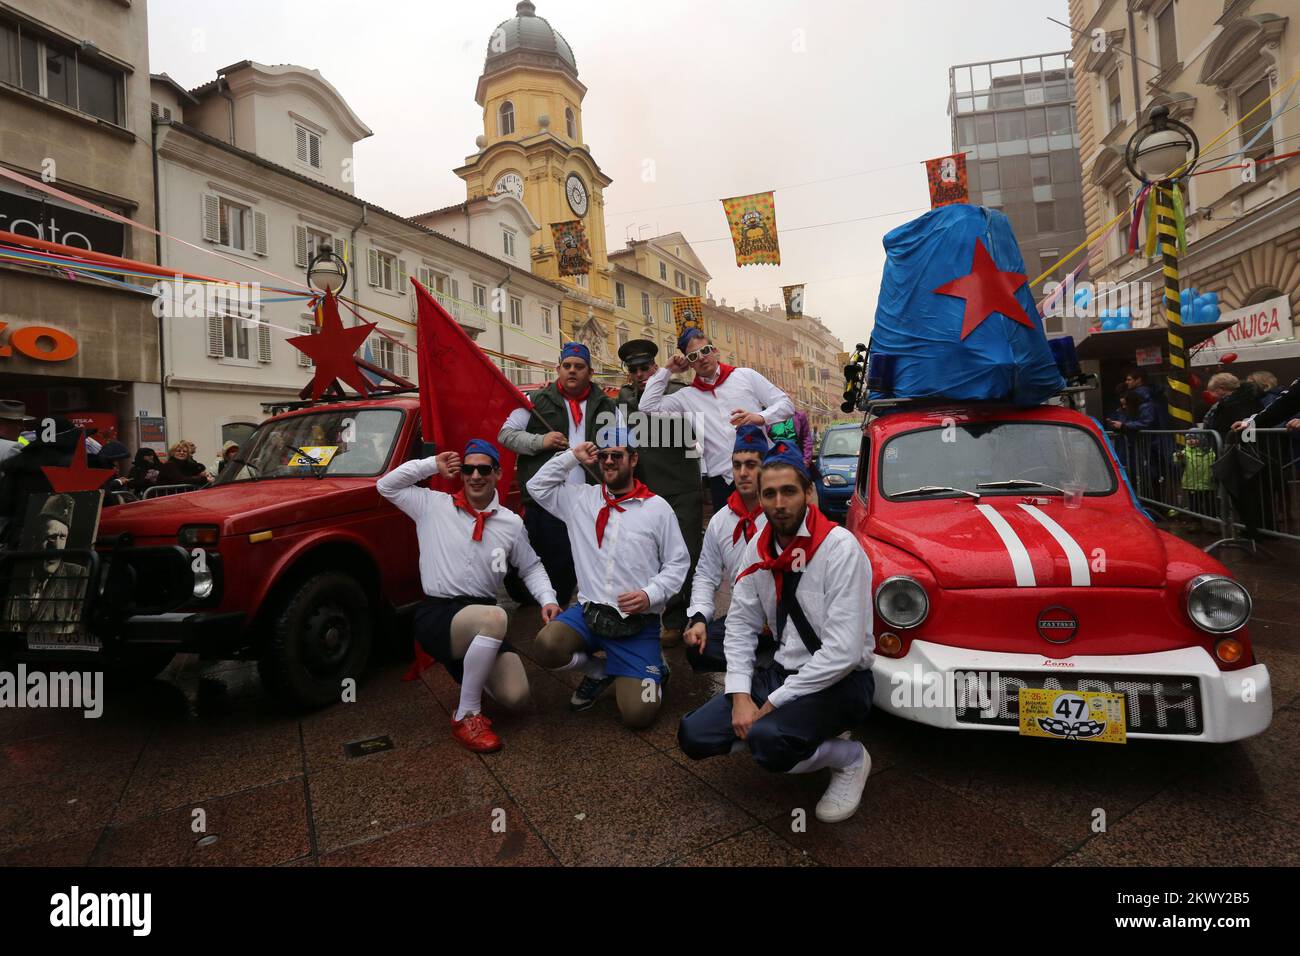 11.02.2017., Rijeka, Croatia - Masked Paris-Bakar Rally is a traditional event organised by the Rijeka Automobile Club. This rally is a parody of the world famous rally Paris-Dakar and has been a supporting sport event of the Rijeka Carnival since 1990. Masked Paris-Bakar Rally is a unique event of its kind in the world, with motorised participants from different regions, all of them - drivers, co-drivers and referees wearing masks, while their decorated vehicles tell a story of their own.  Photo: Goran Kovacic/PIXSELL Stock Photo